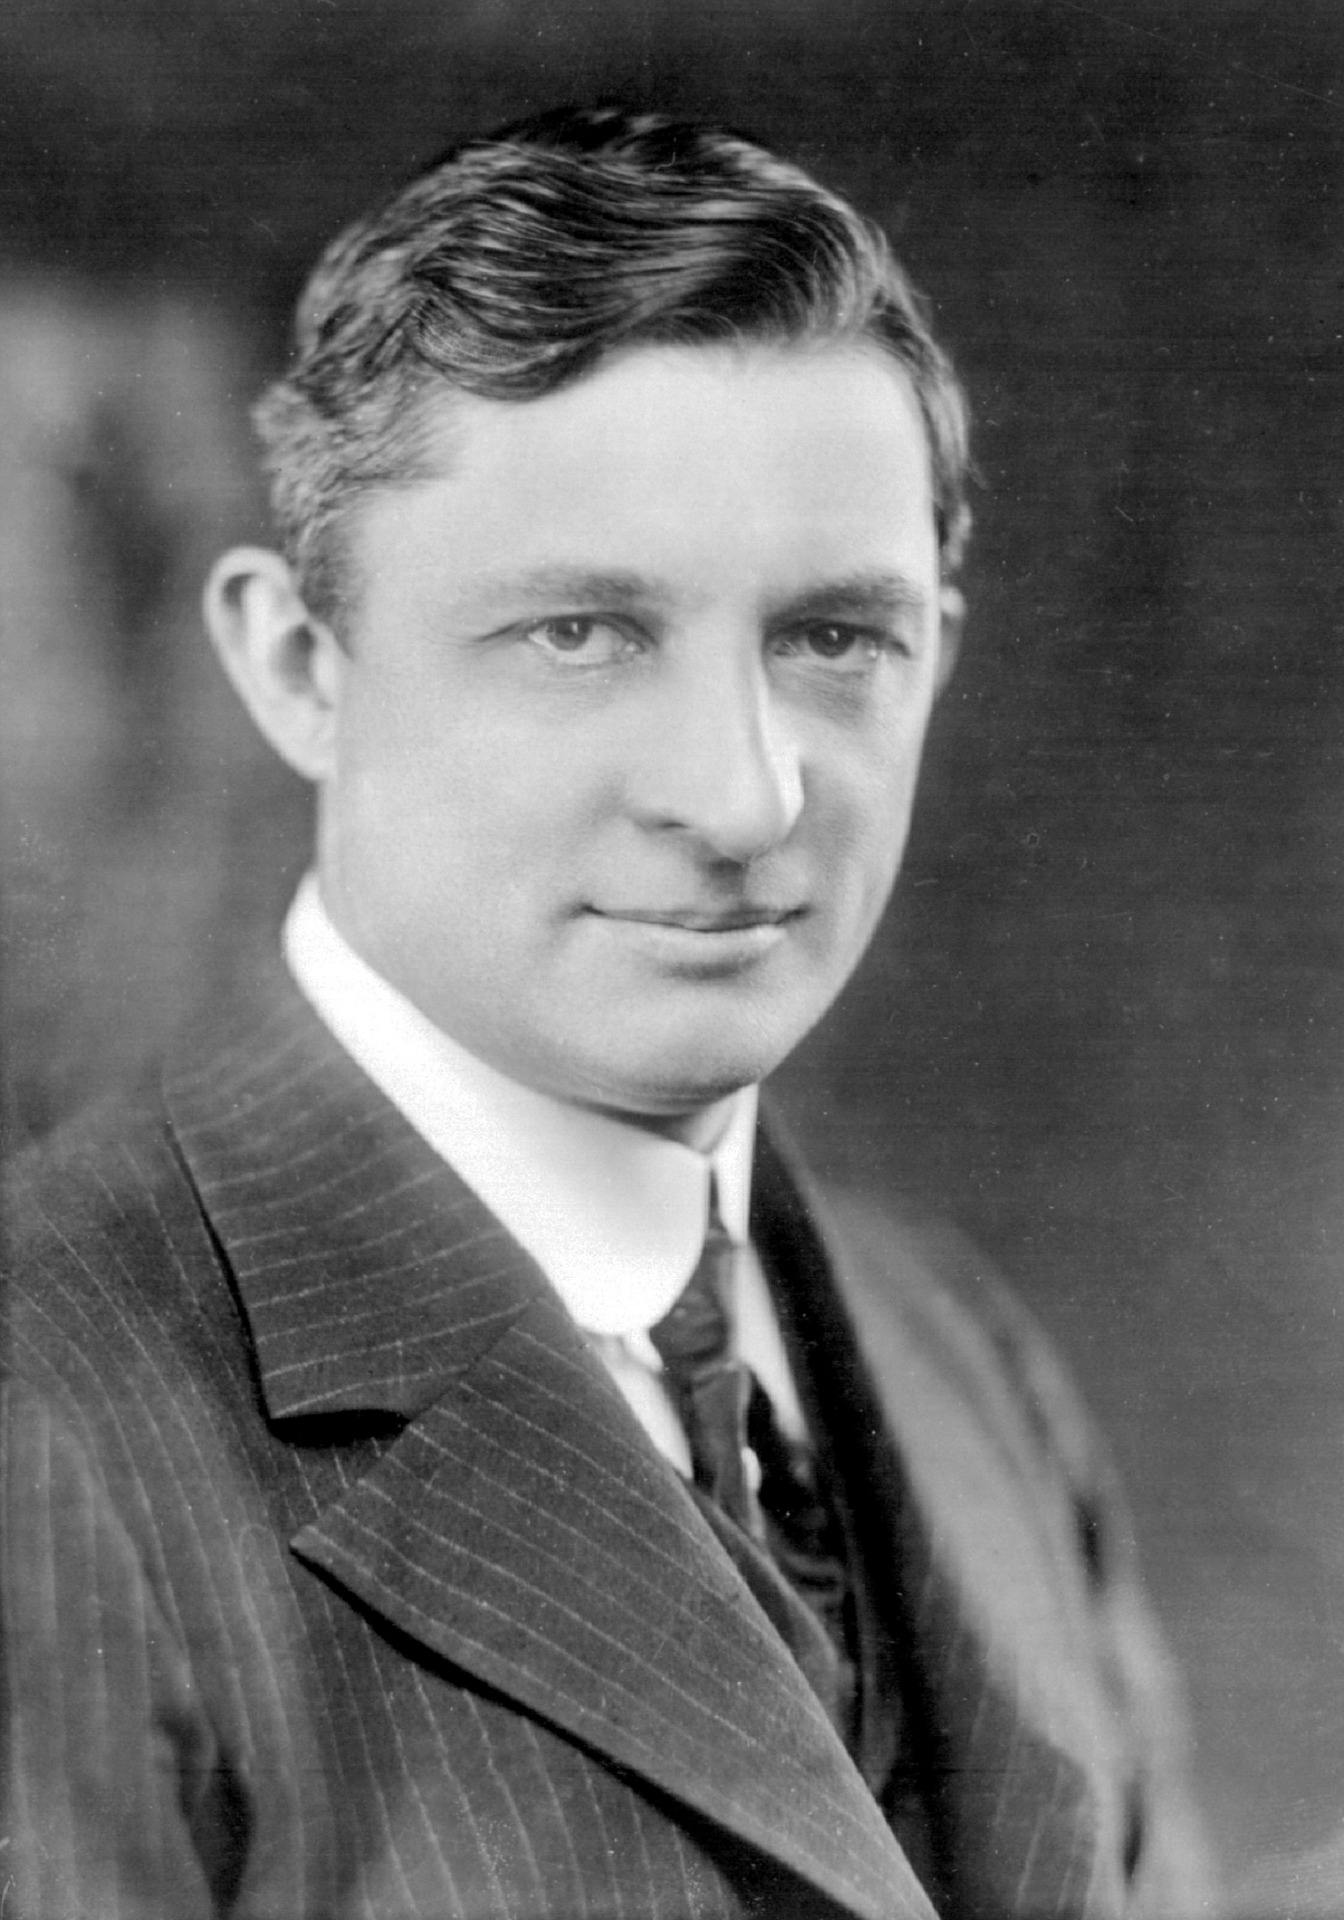 Willis Carrier, the pioneering inventor of modern air conditioning technology poses for a portrait 